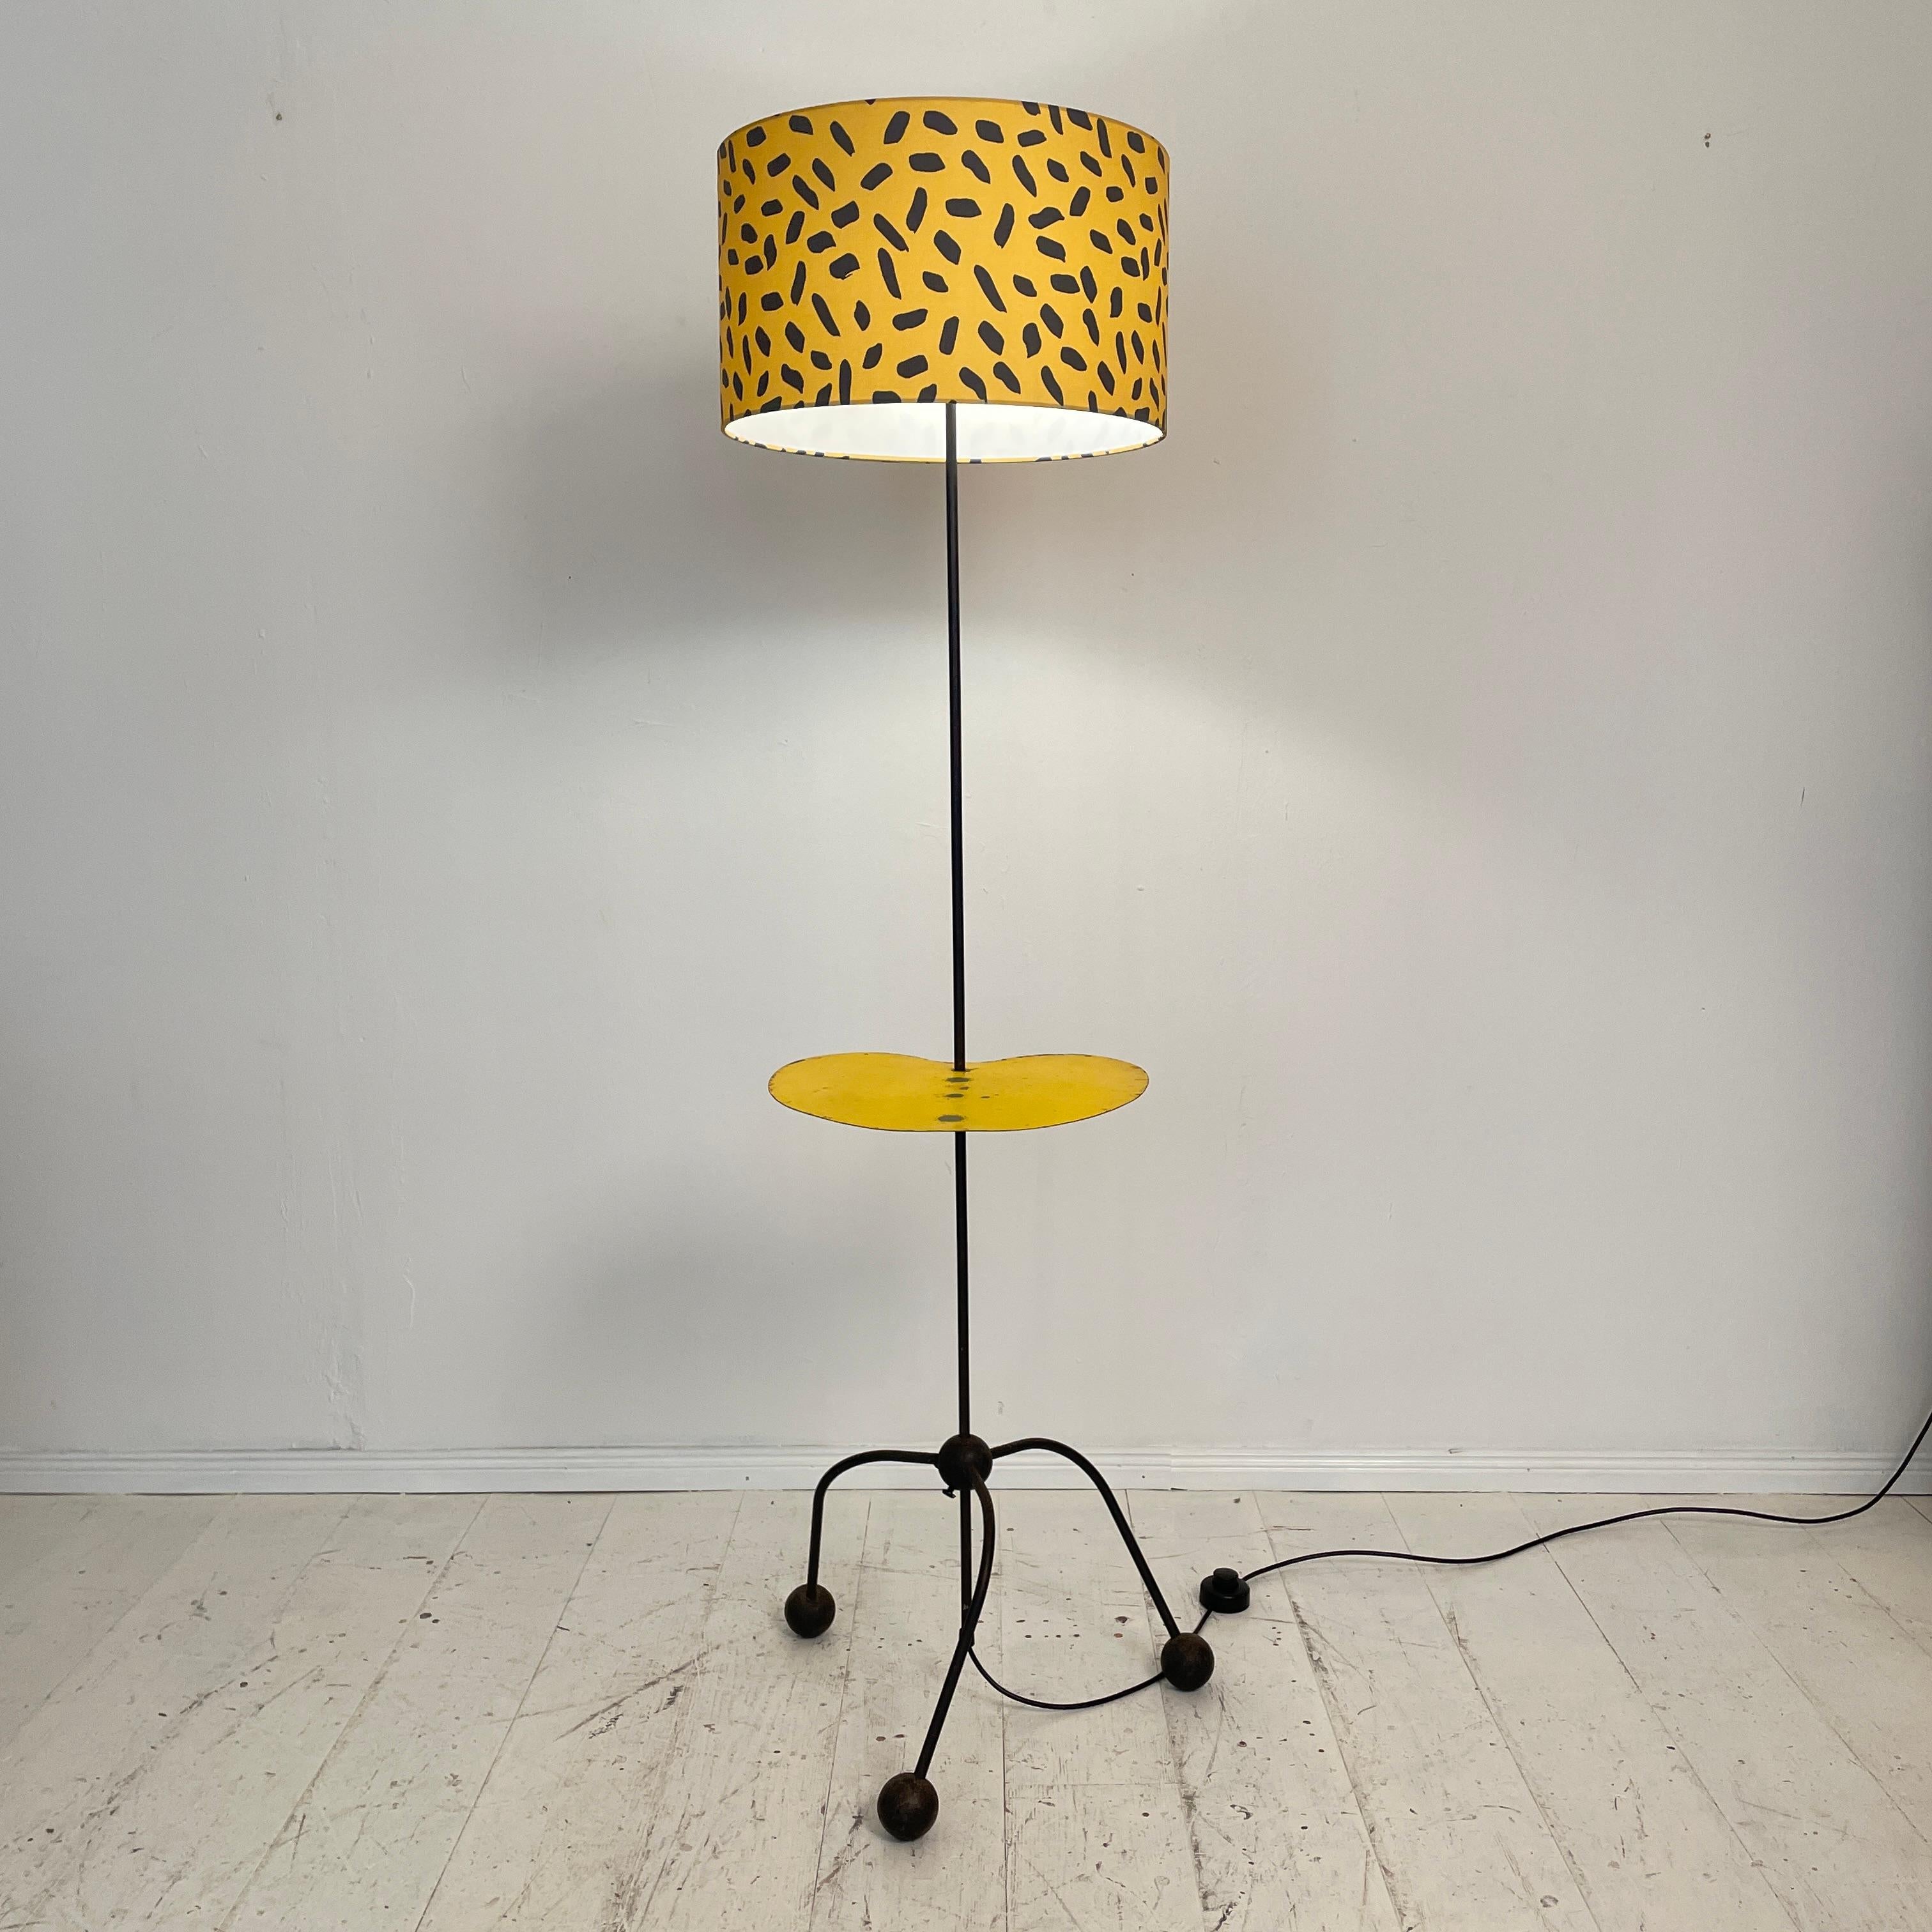 Mid-Century French Floor Lamp Made of Black Metal with Yellow Fabric Shade, 1950 For Sale 4